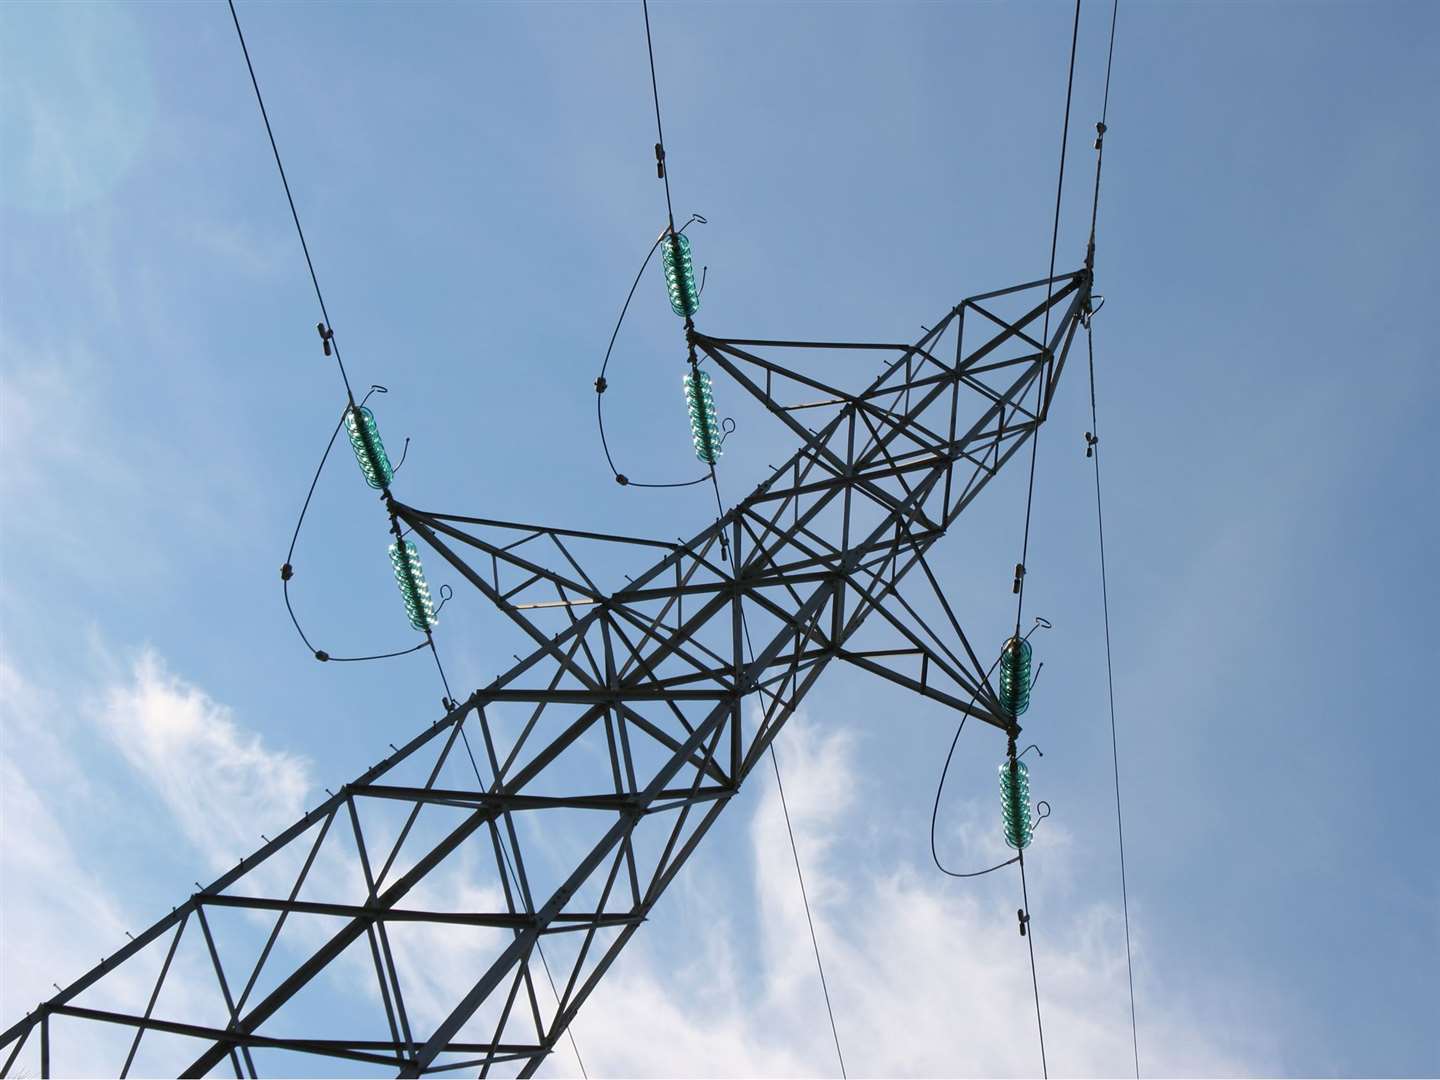 The proposed 400kV overhead line is part of a 'transformational upgrade of the transmission system'.